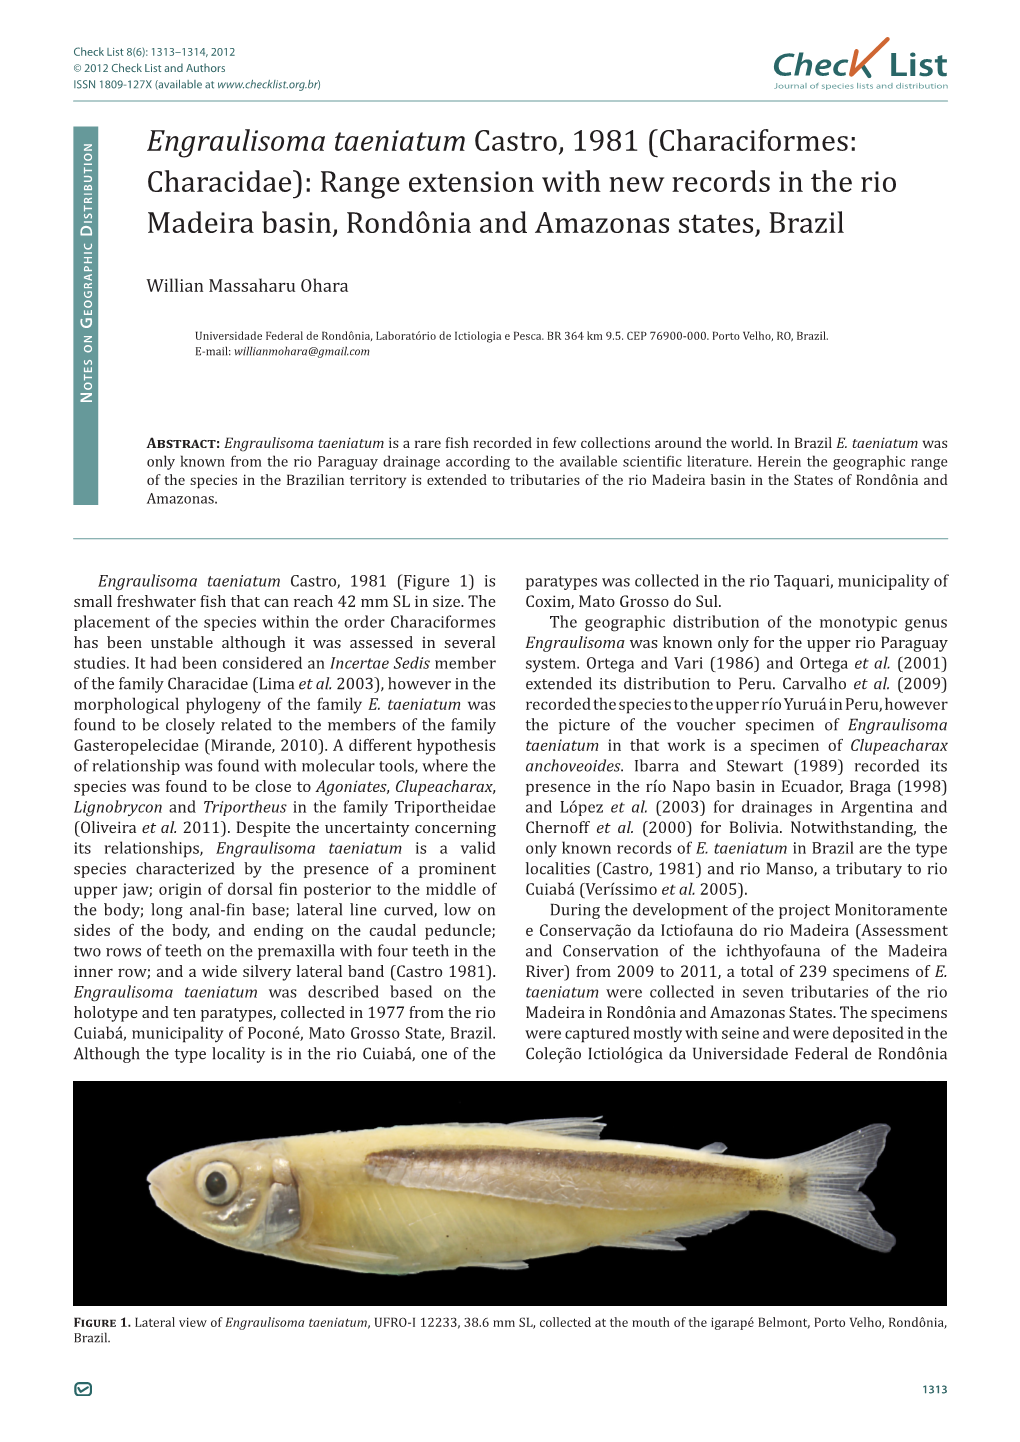 Characidae): Range Extension with New Records in the Rio Madeira